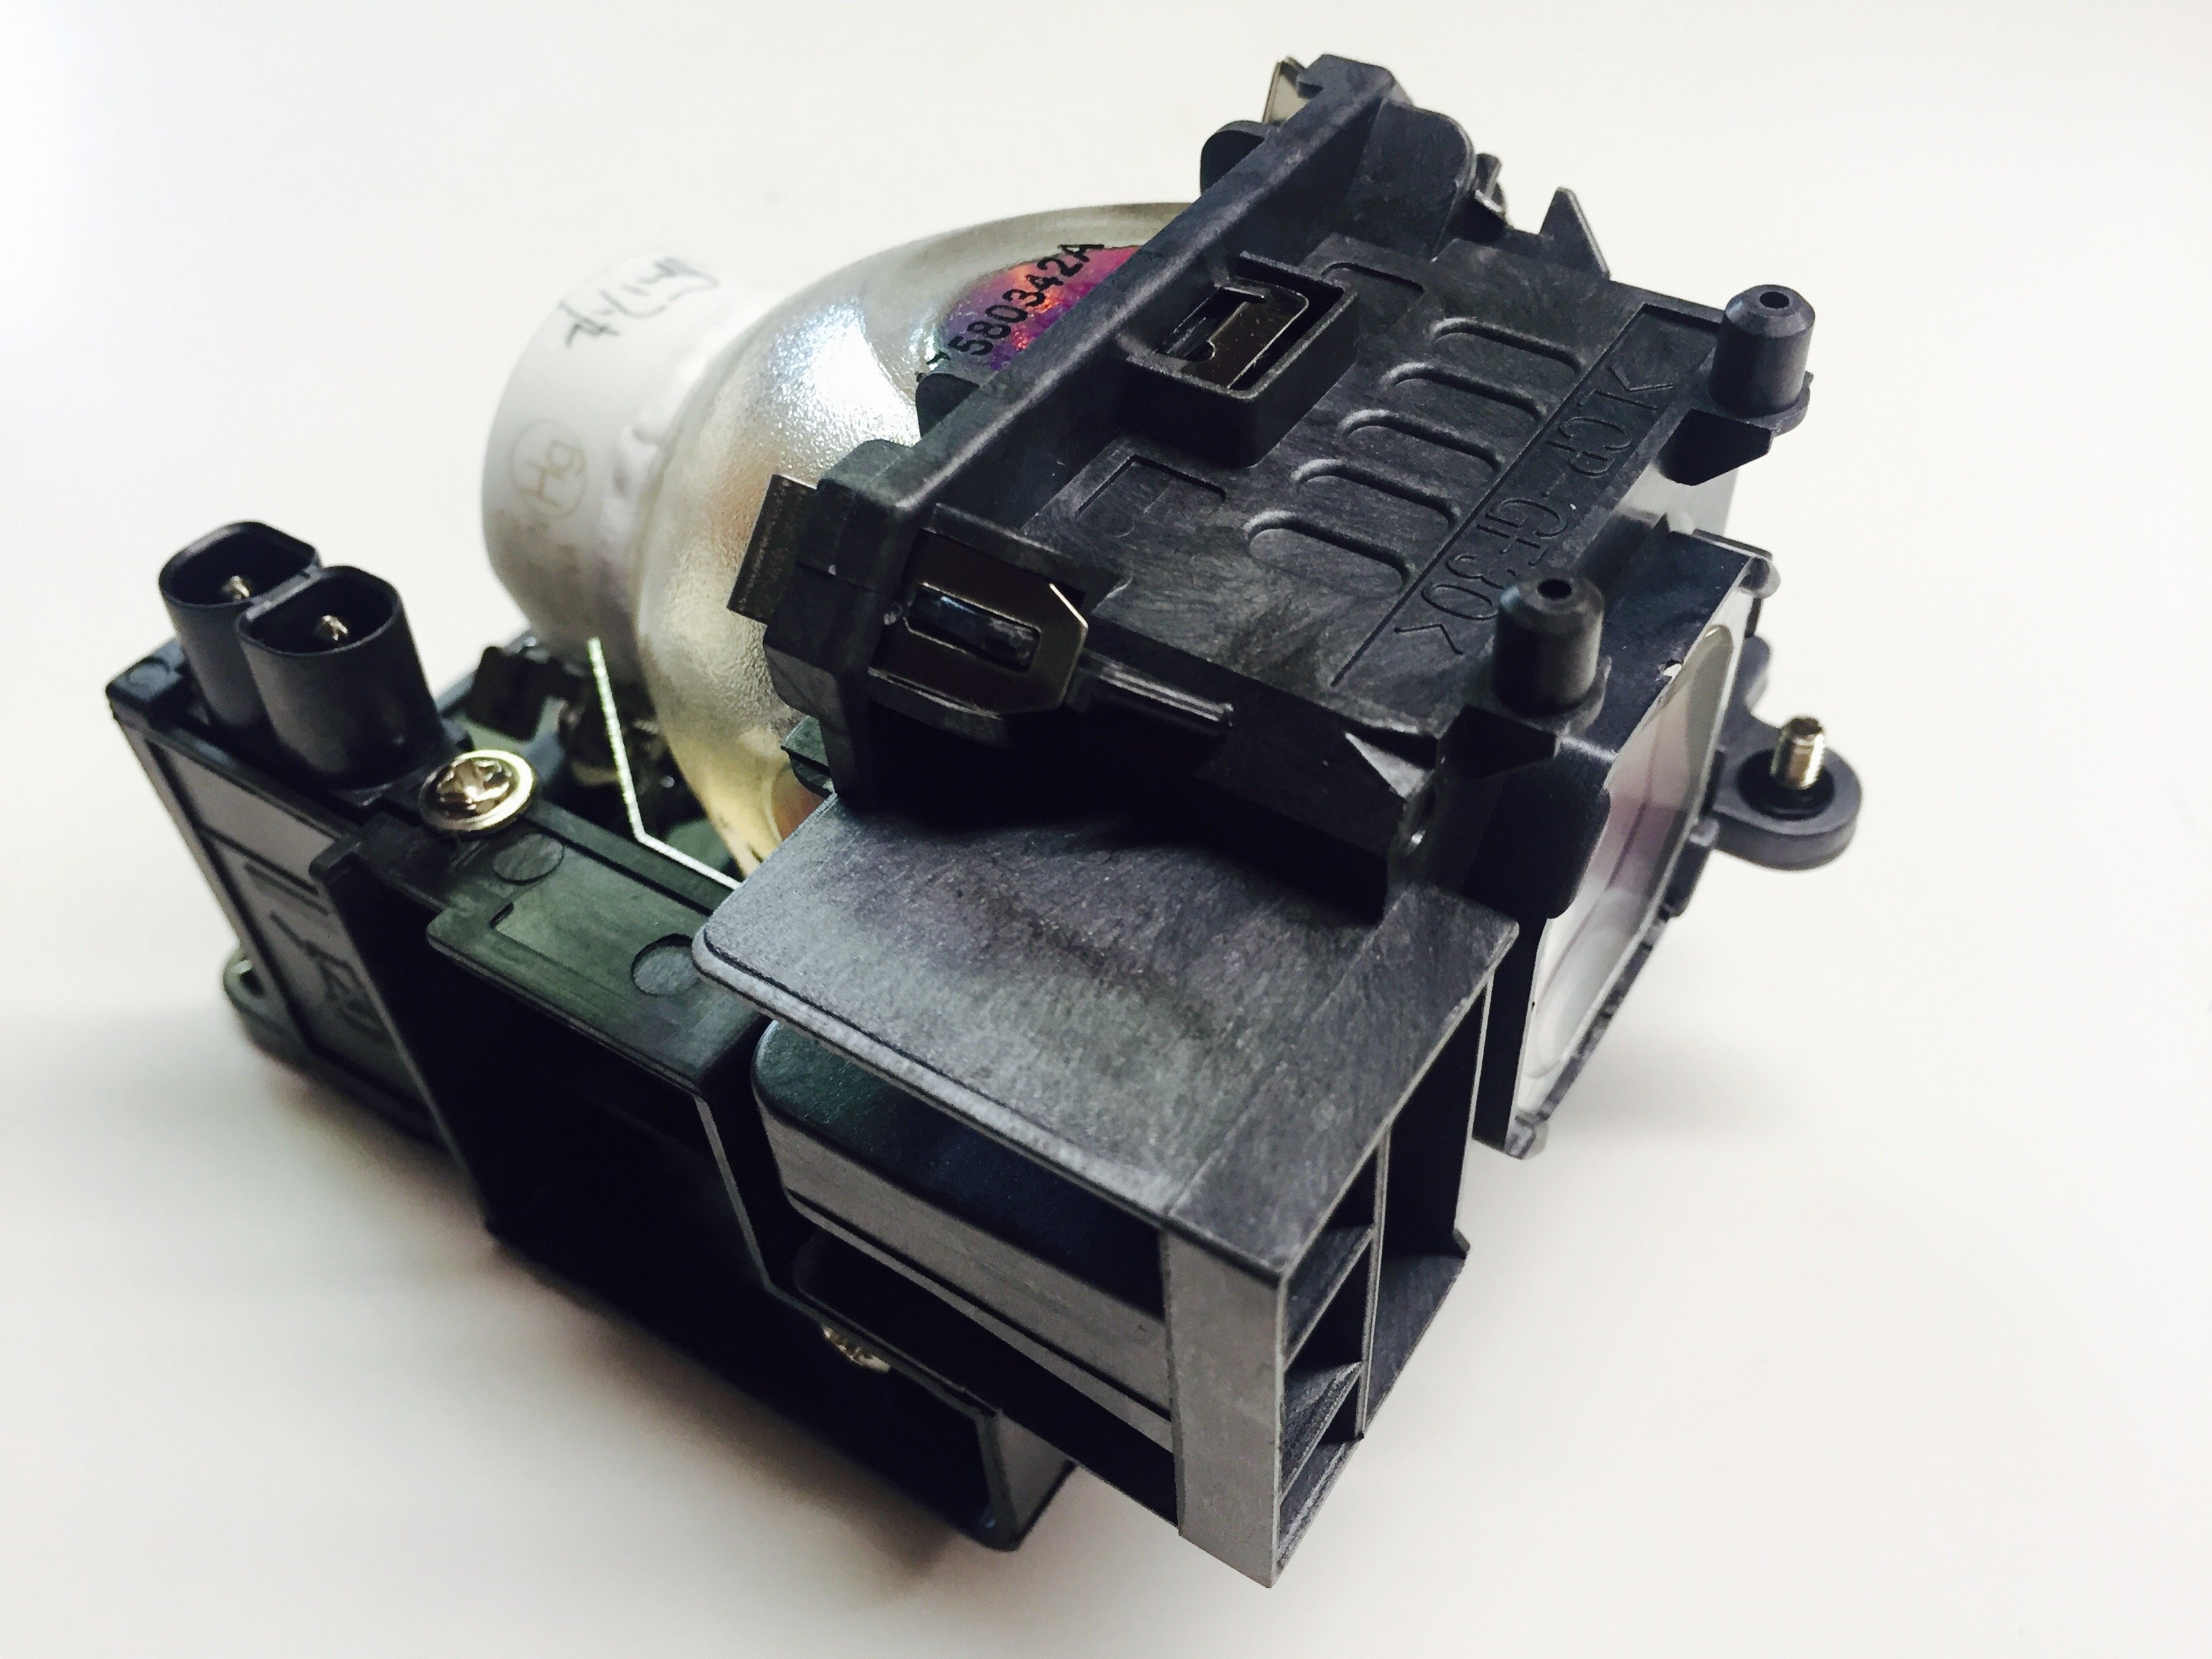 Original Ushio Replacement Lamp & Housing for the NEC M260XS Projector - image 1 of 7